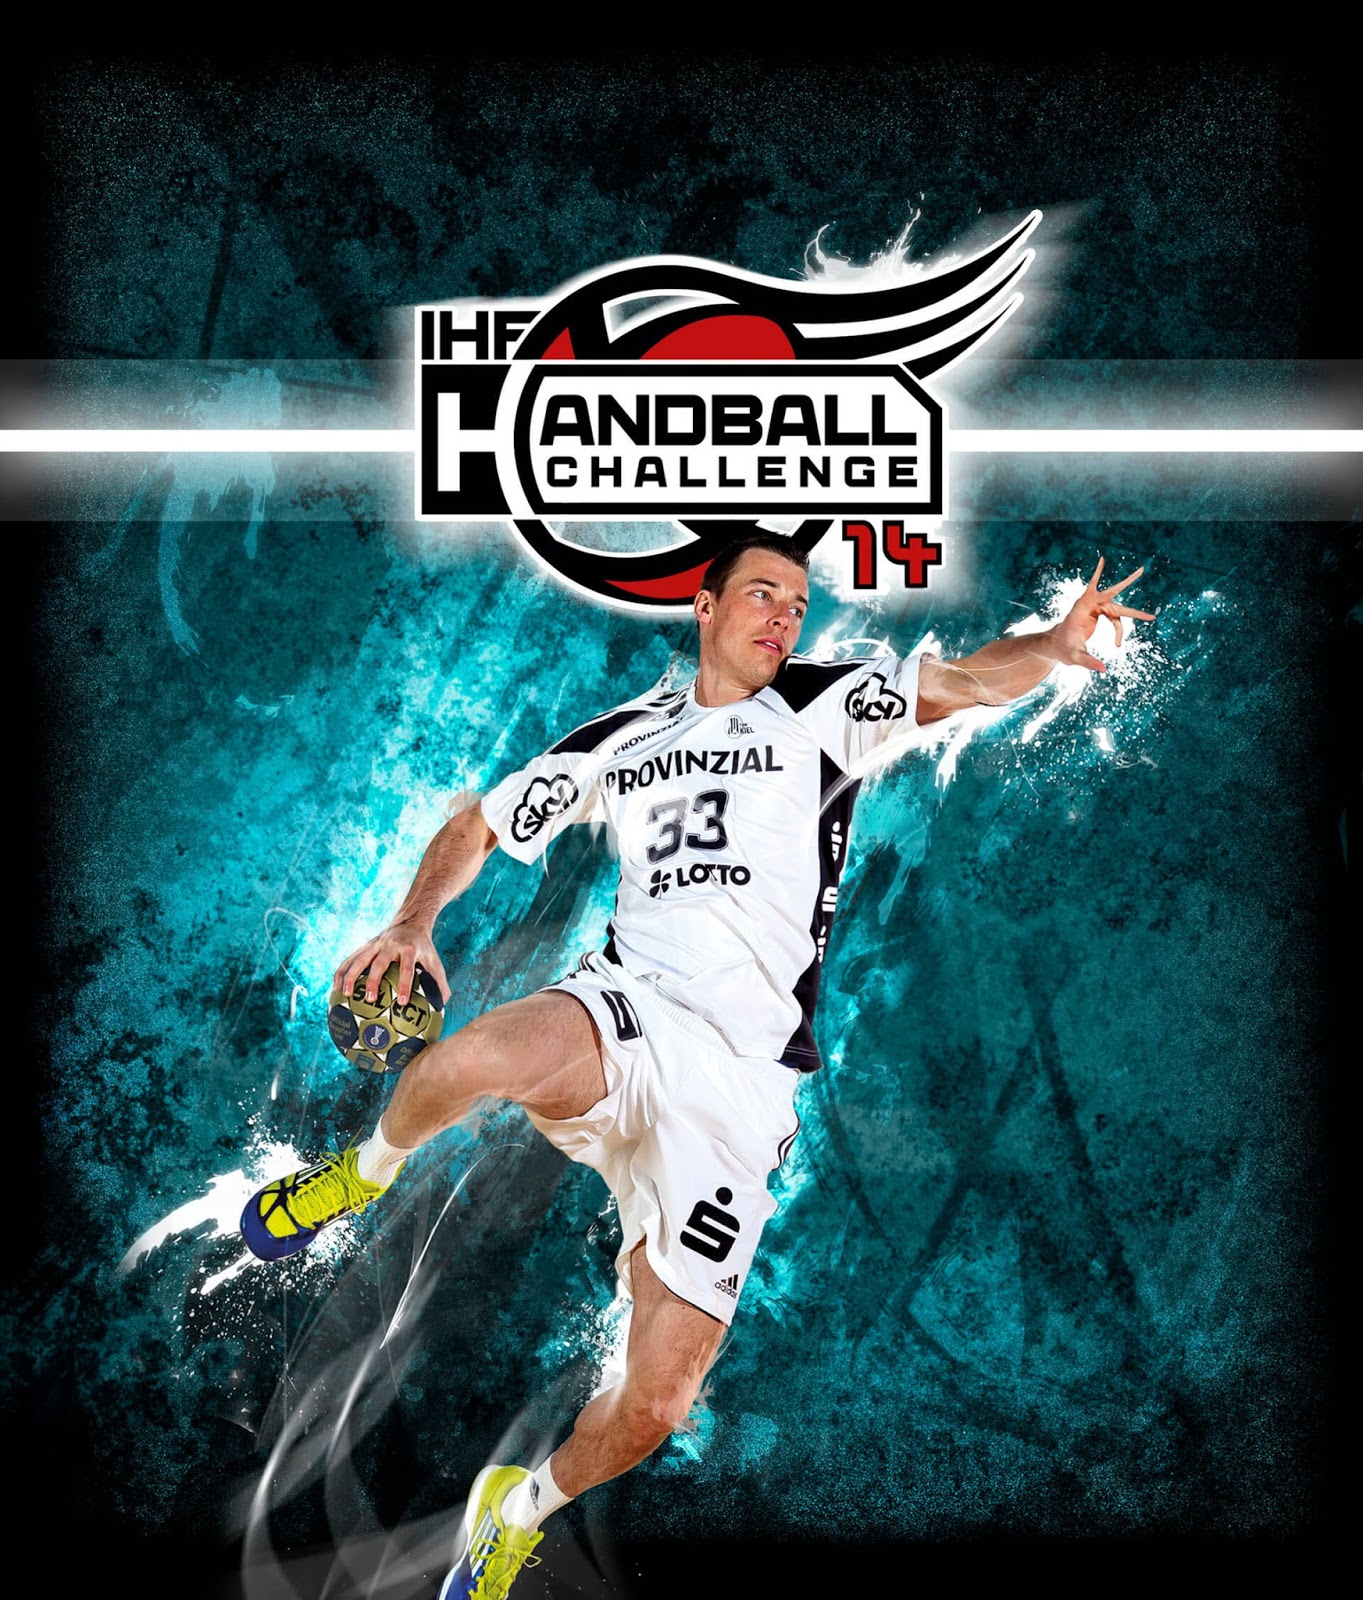 Full Version PC Games Free Download: IHF Handball Challenge 14 Full PC Game Free Download- Skidrow